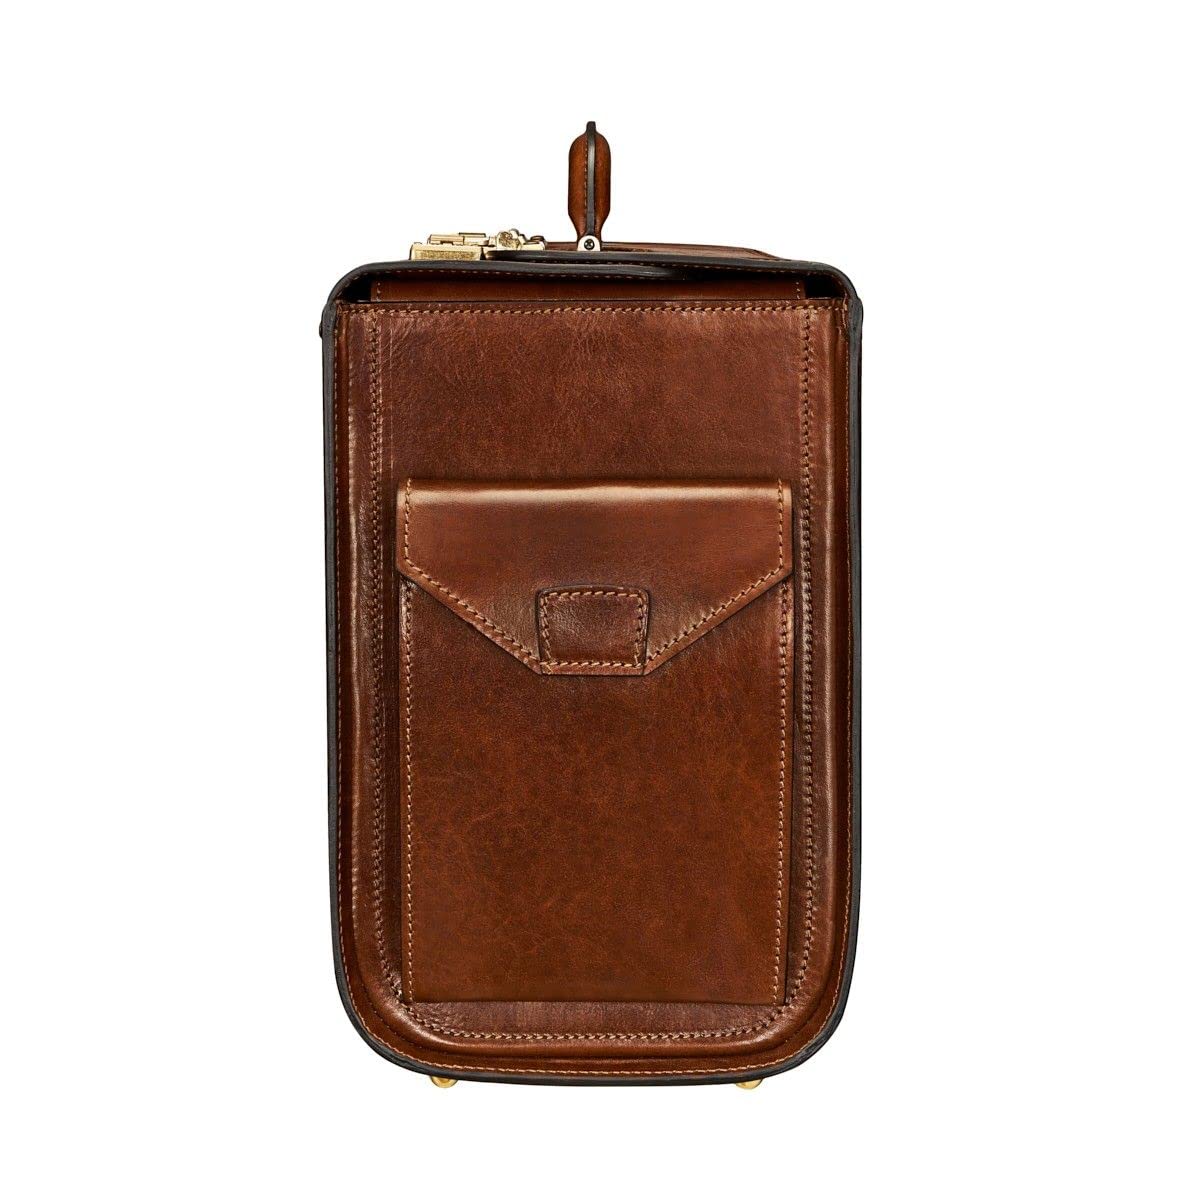 Maxwell Scott - Personalized Mens Luxury Leather Pilot Briefcase/Catalog Case with Combination Lock - The Varese - Chestnut Tan